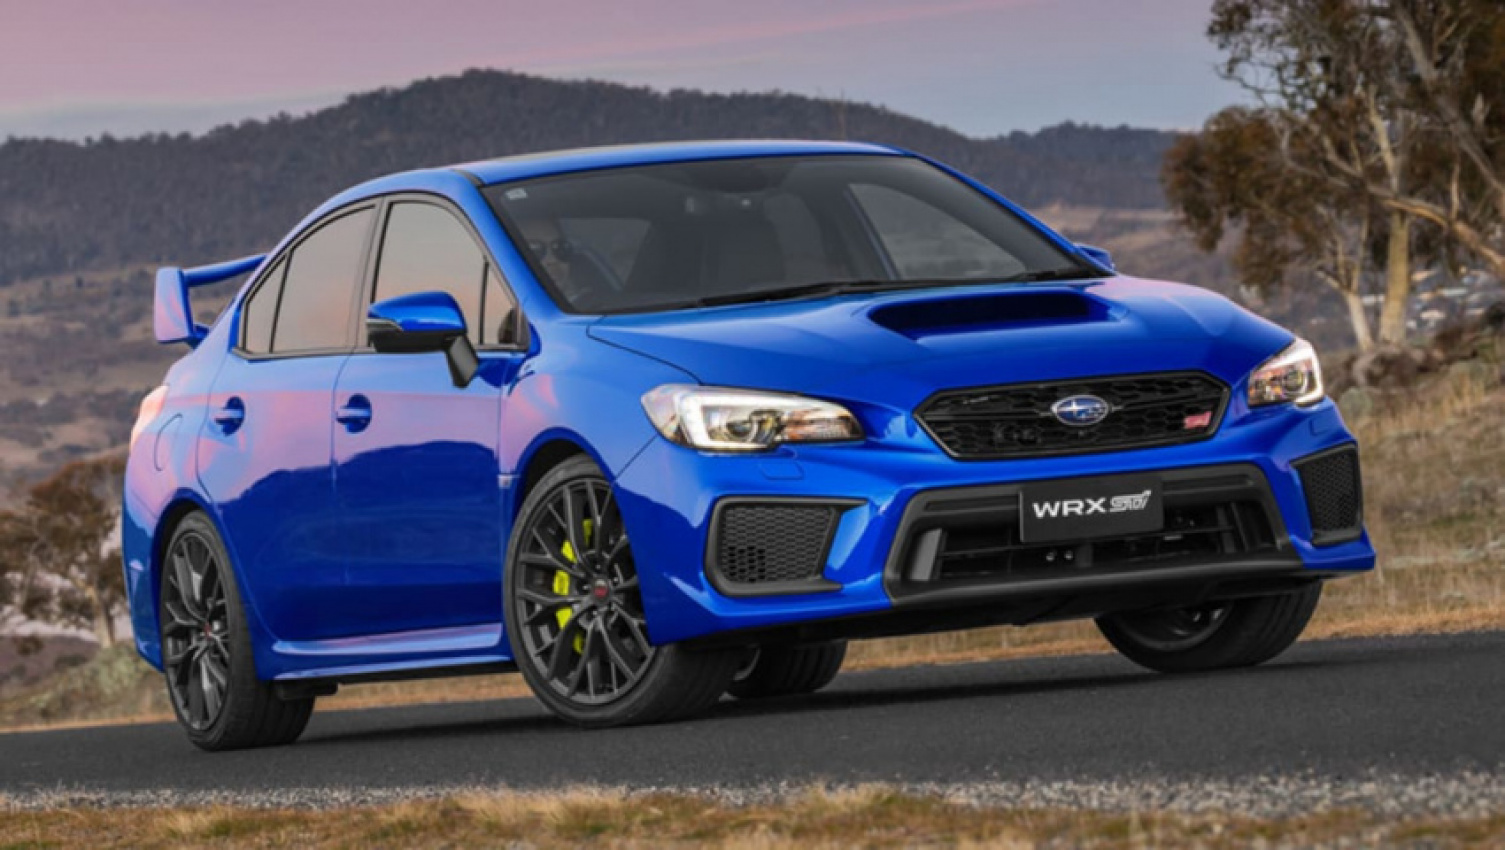 autos, cars, subaru, industry news, sports cars, subaru news, subaru sedan range, subaru wrx, subaru wrx 2022, axed subaru wrx sti deserved better, even if an electric future is bright  | opinion